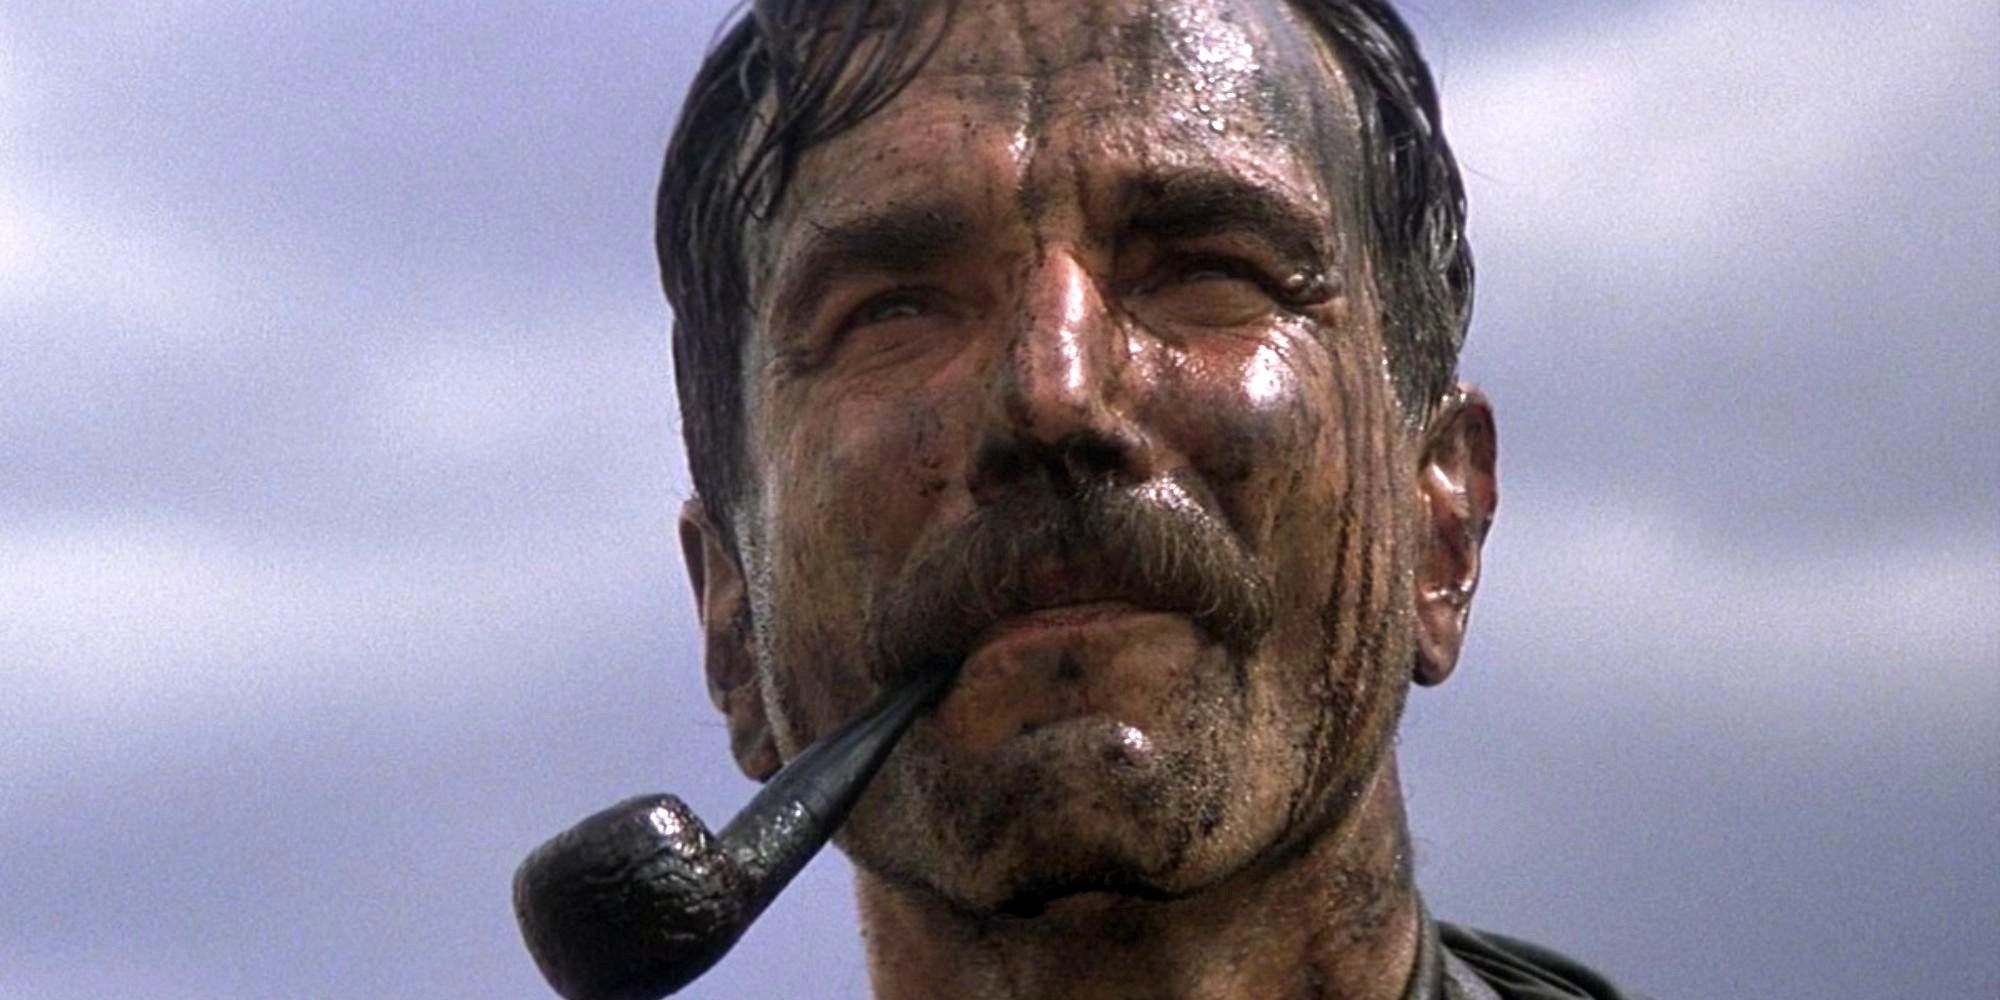 Daniel Day-Lewis as Daniel Plainview in There Will Be Blood (2007)